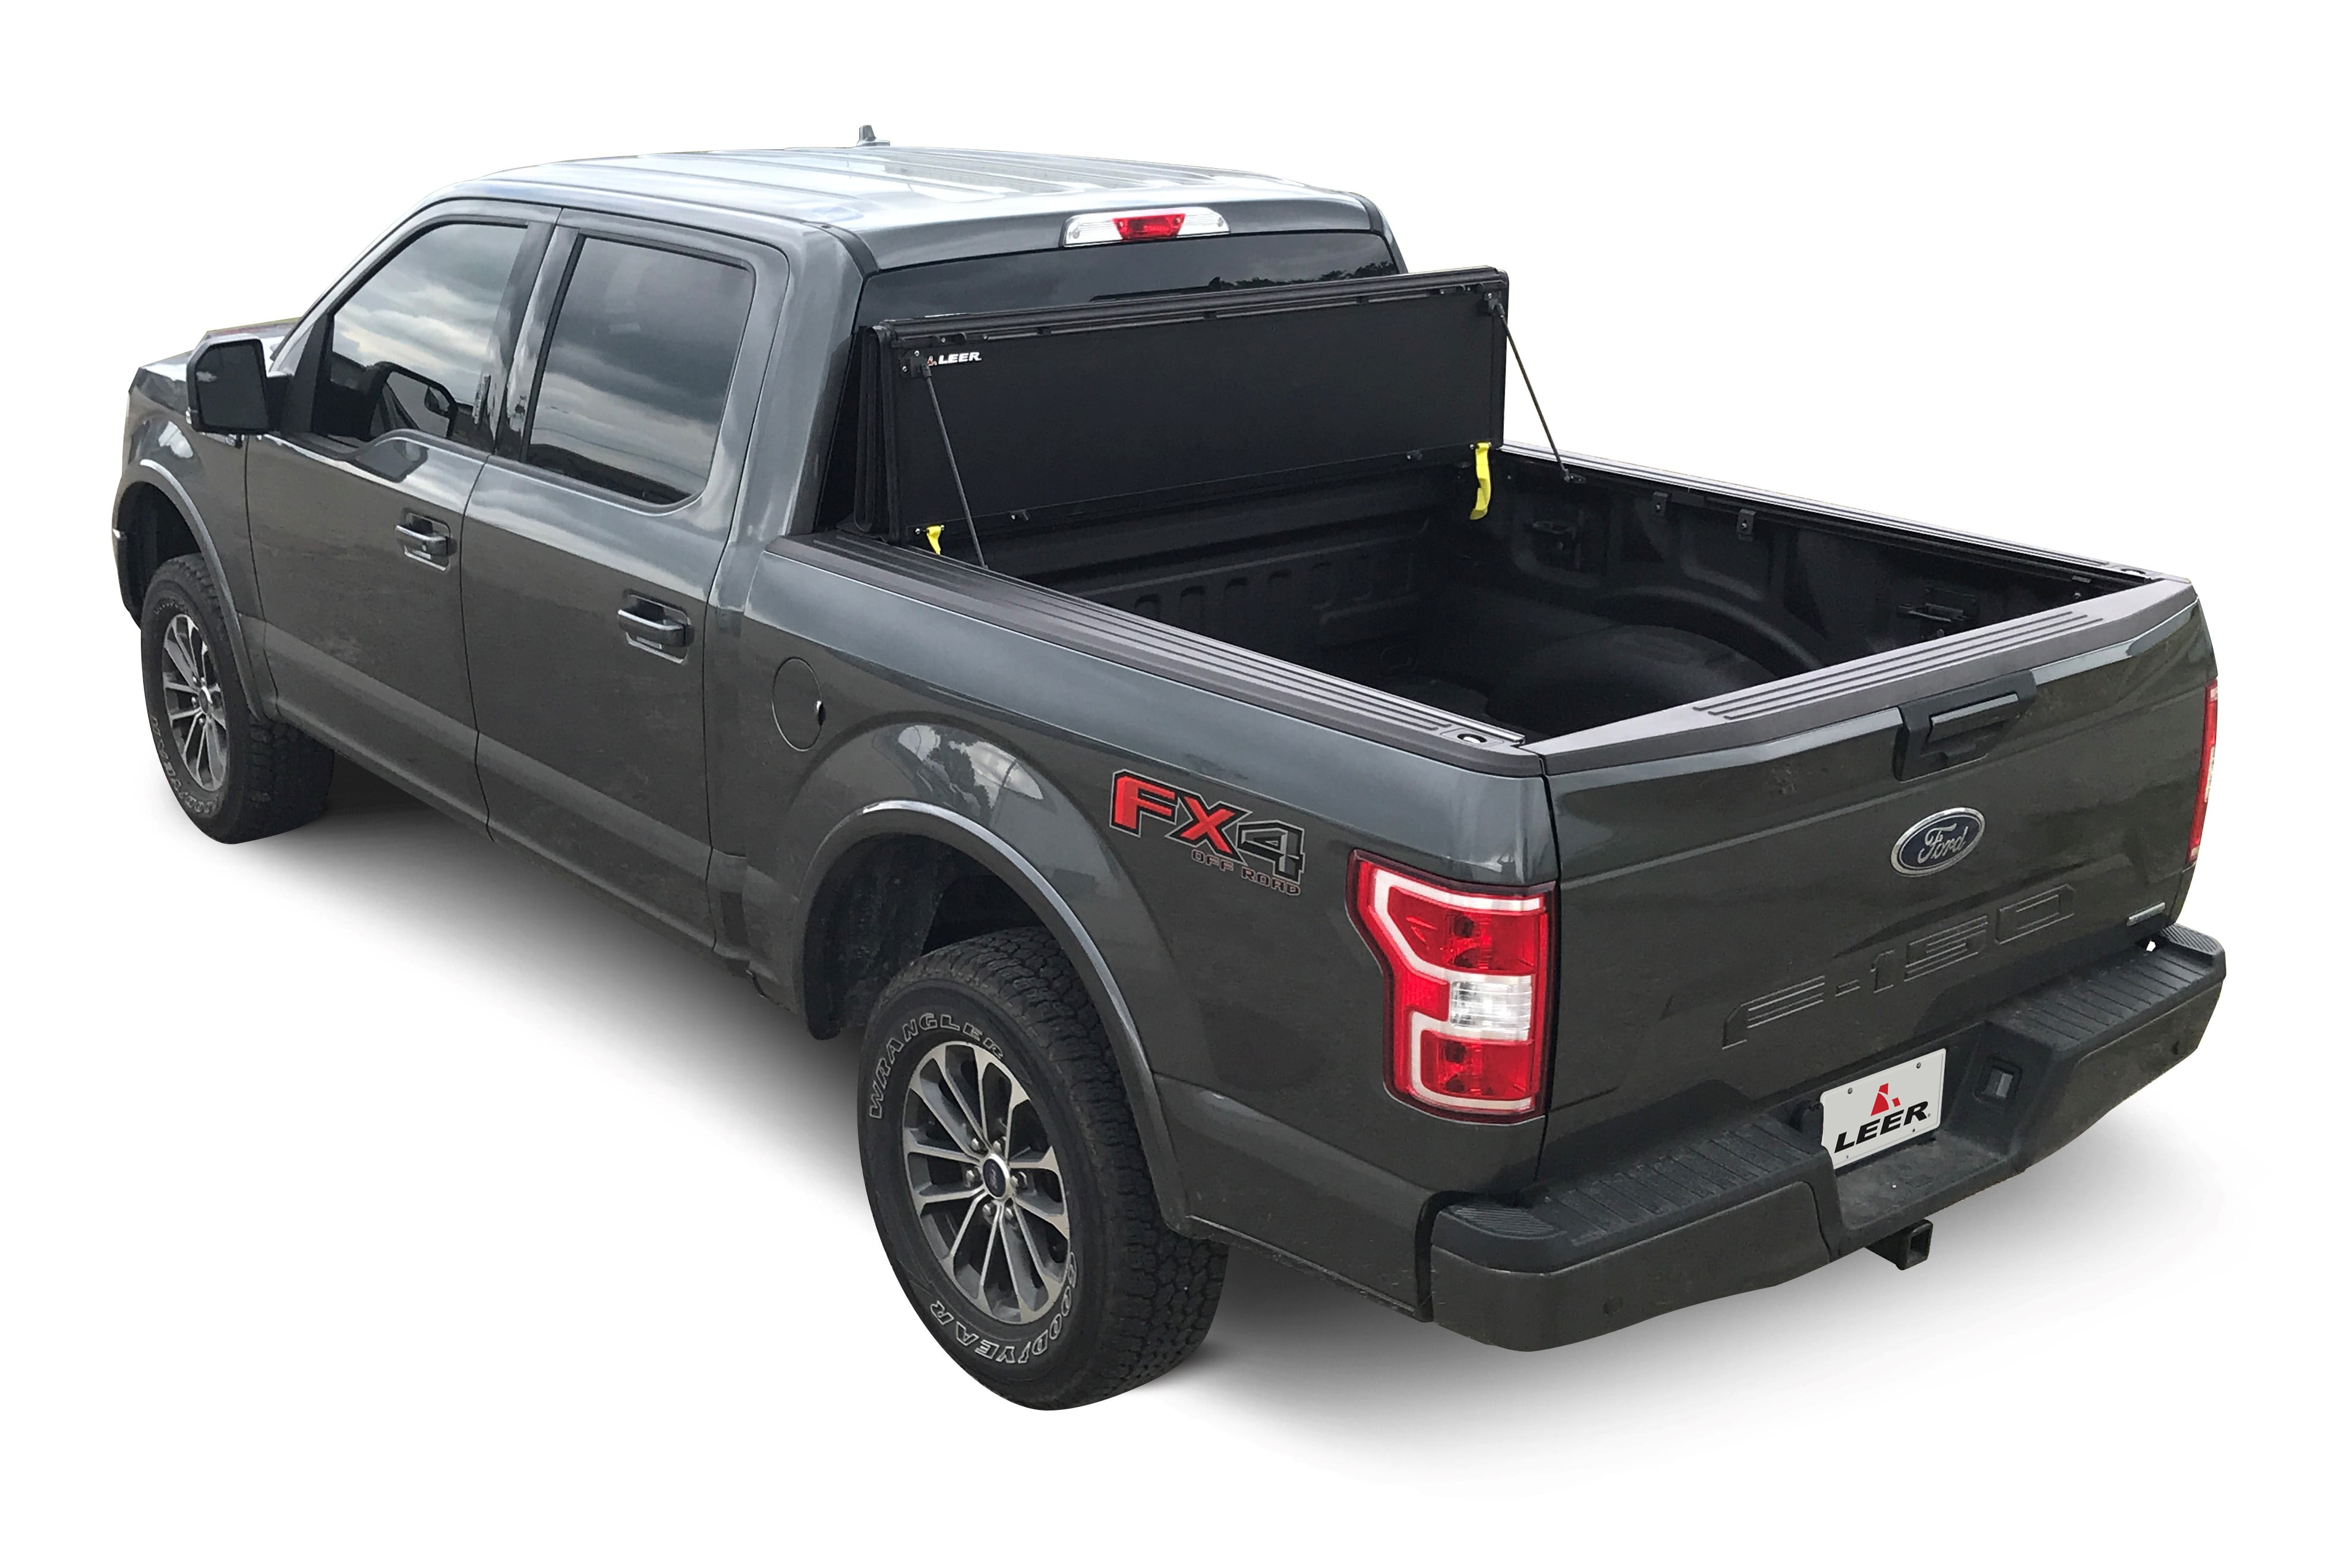 Bandiet Aanklager Inpakken Leer Hf650m Fits 2014+ Toyota Tundra With 5.6 Ft Bed With Or W/O Track  Hard, - Walmart.com